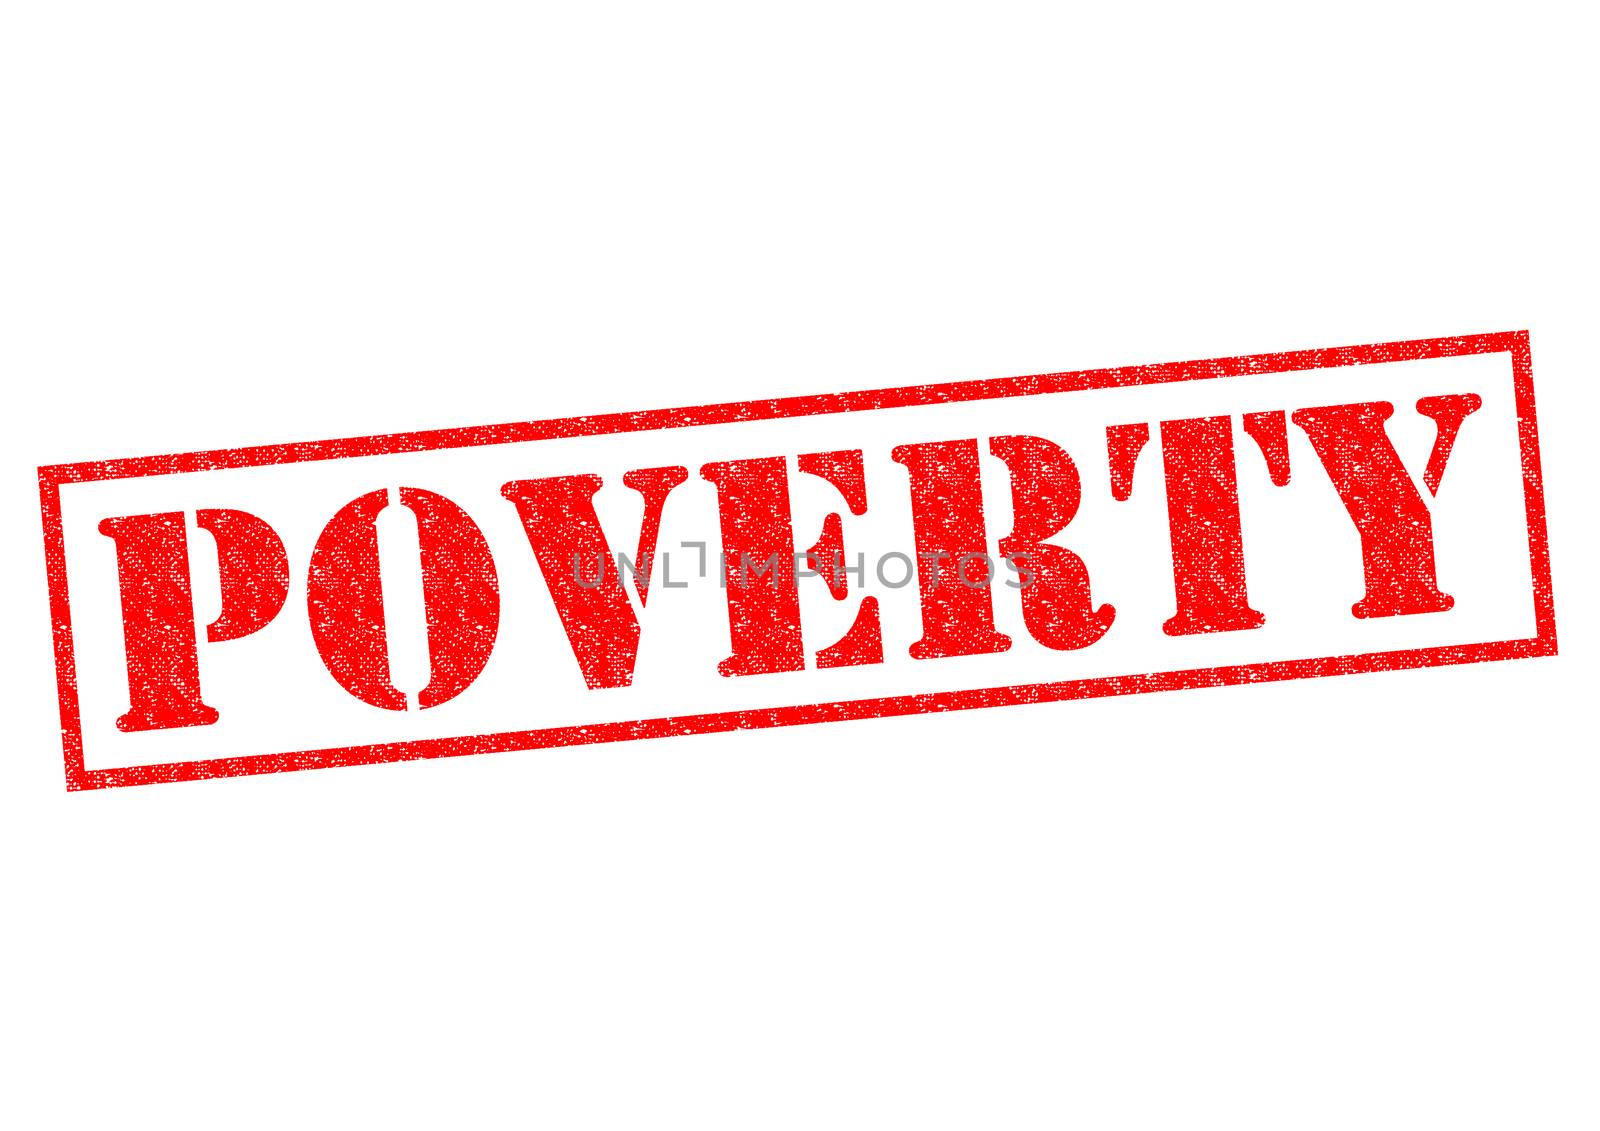 POVERTY red Rubber Stamp over a white background.